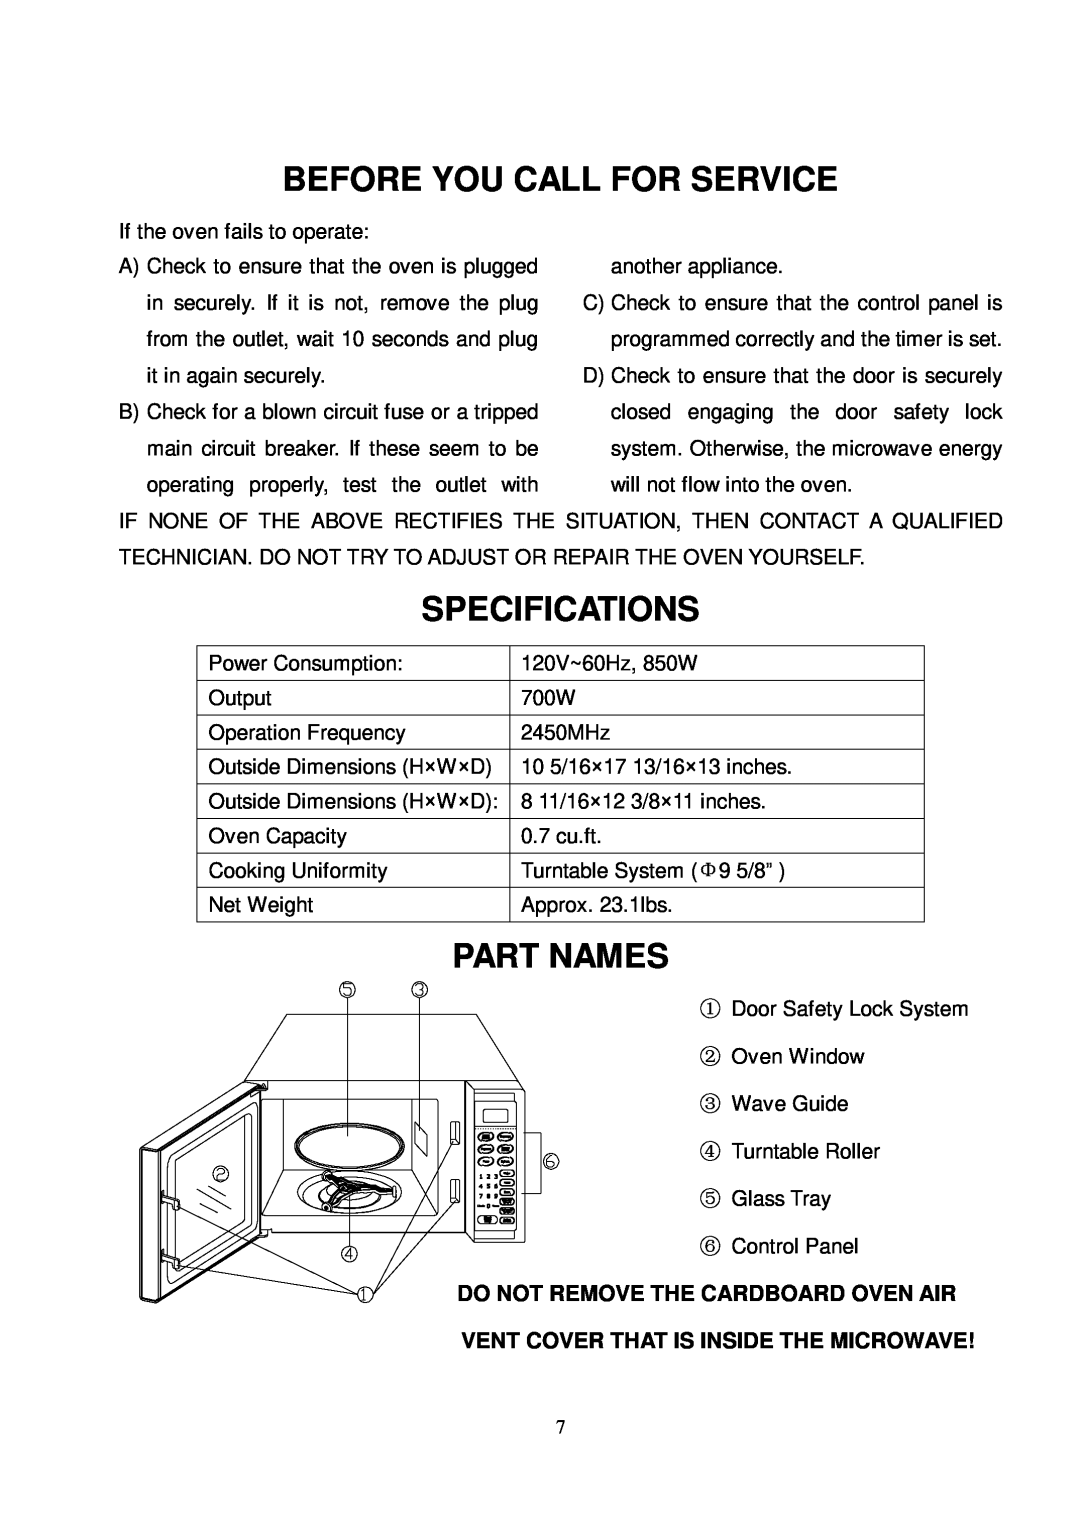 Sunbeam SMW7141 owner manual Before You Call For Service, Specifications, Part Names, Do Not Remove The Cardboard Oven Air 